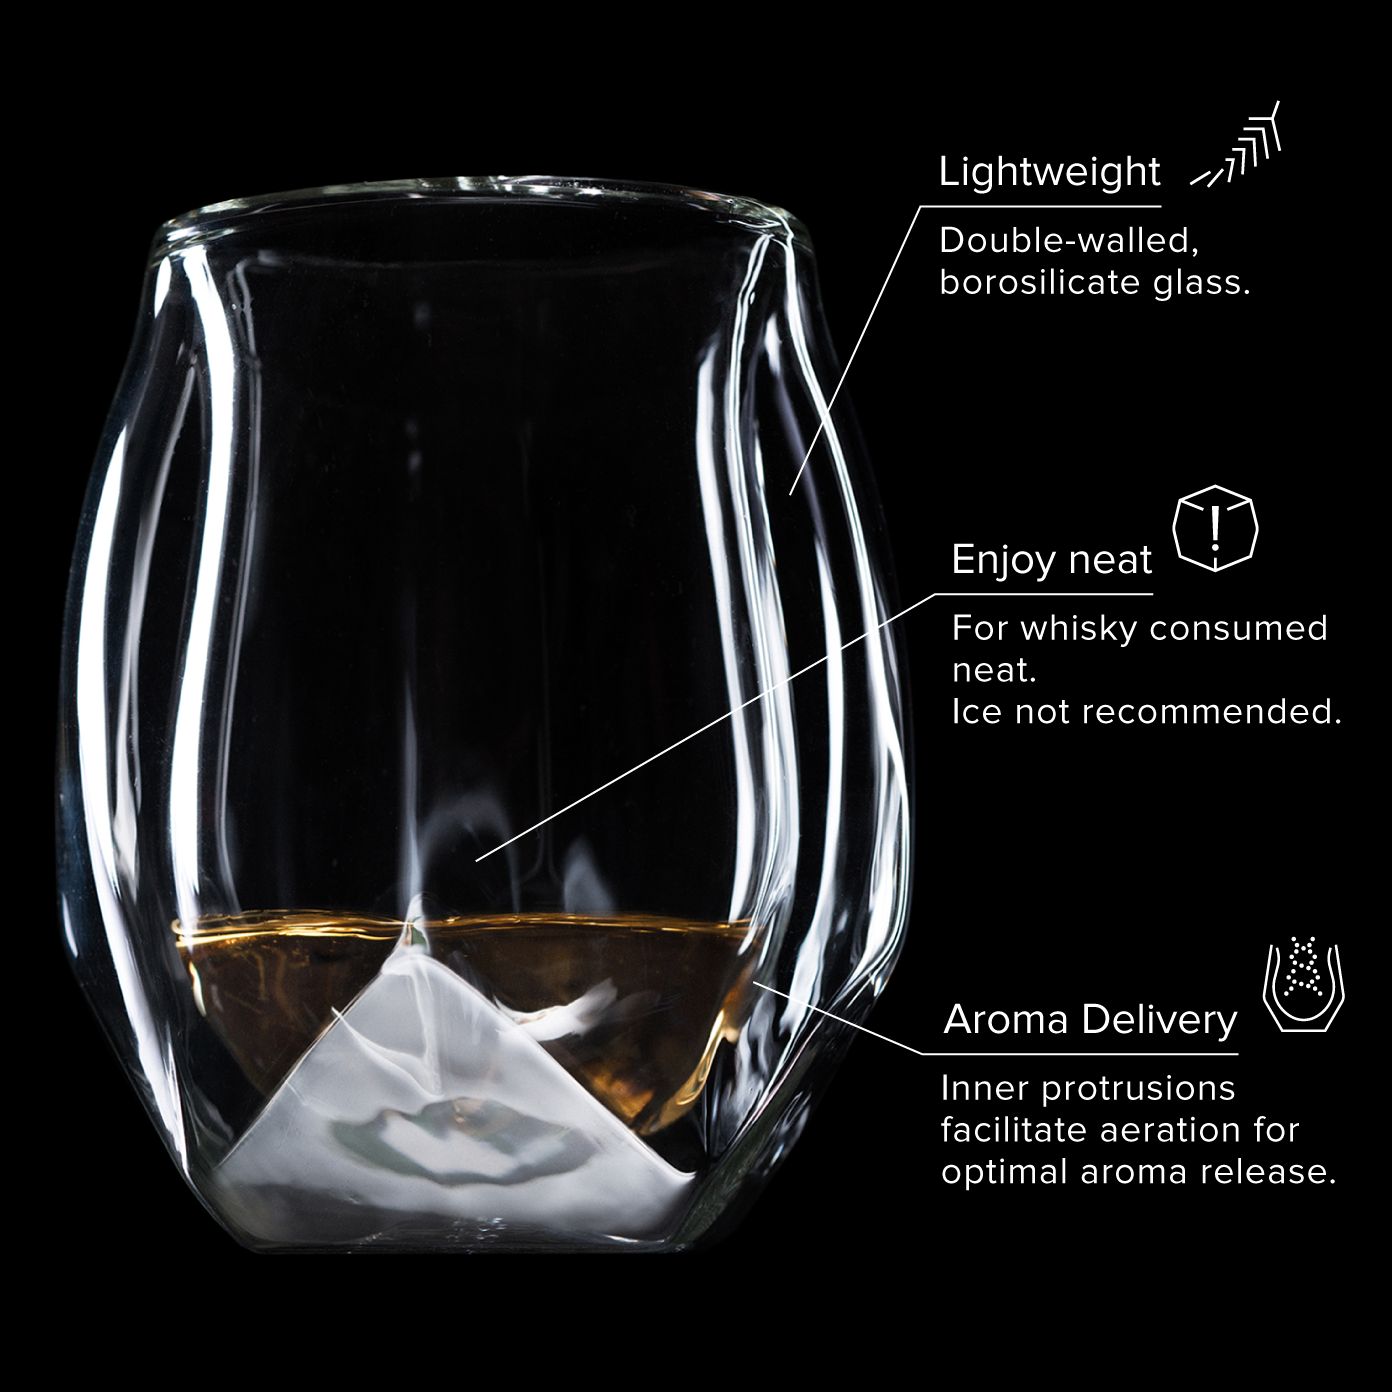 A lightweight, double-walled borosilicate whisky glass for enjoying whiskey neat